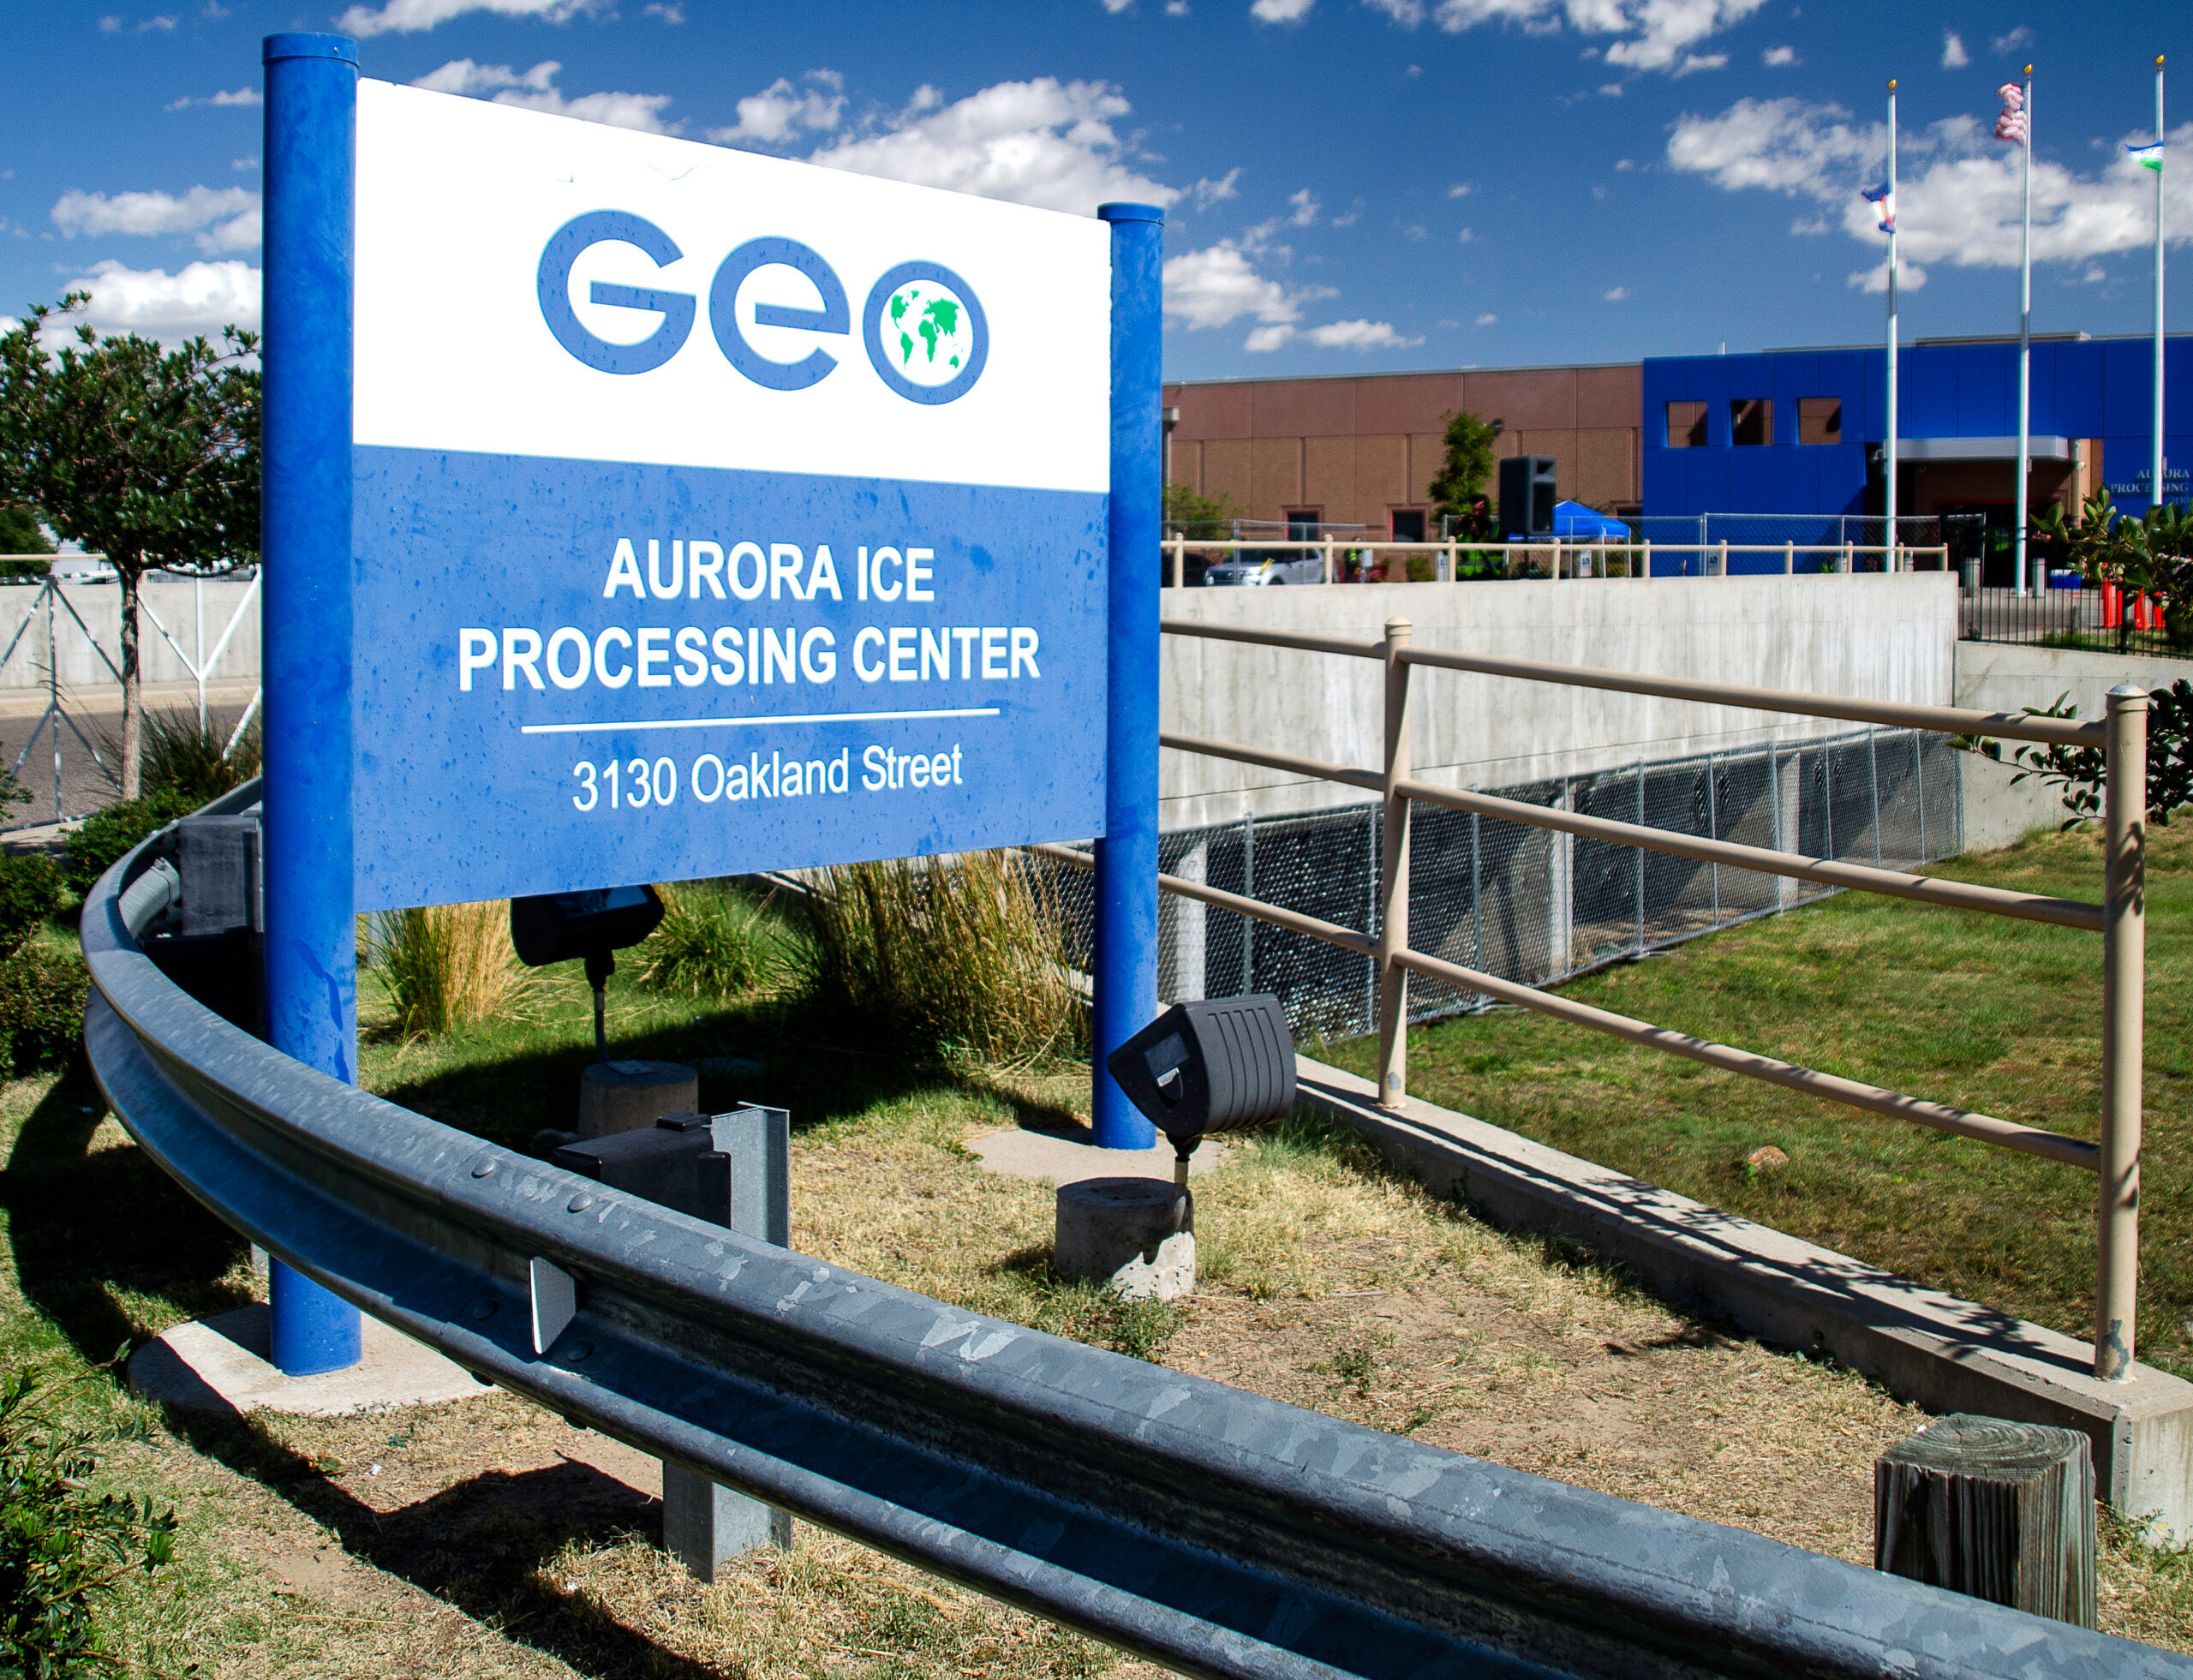 Aurora, Colorado / USA - 9/21/19: Operated by the for-profit prison company The GEO Group, this ICE Detention Center is accused by the ACLU of medical neglect and mistreatment of inmates.